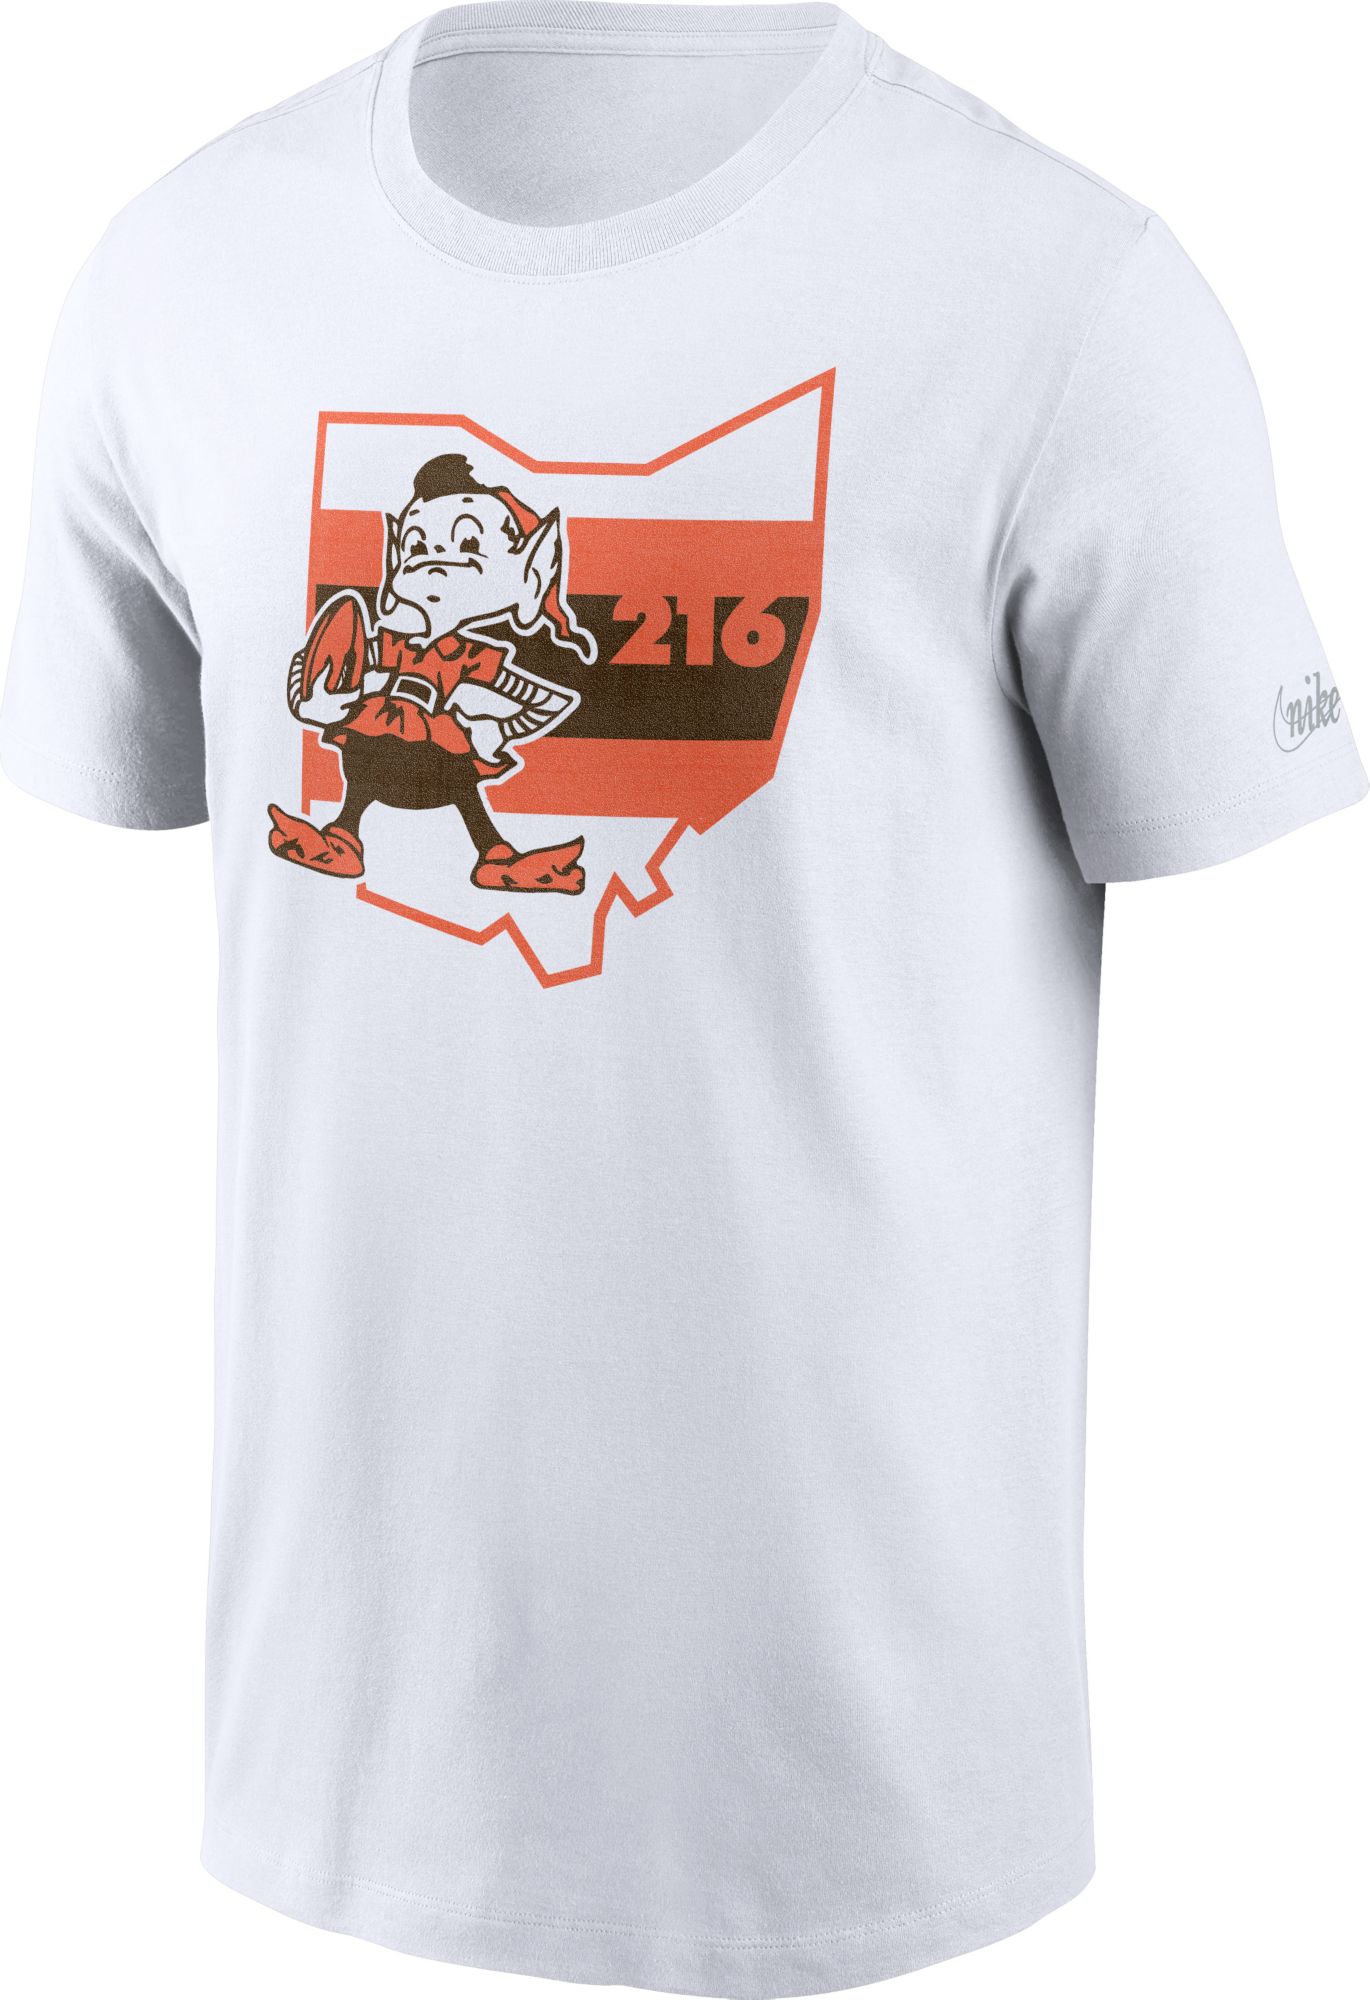 Nike / Men's Cleveland Browns Brownie State White T-Shirt